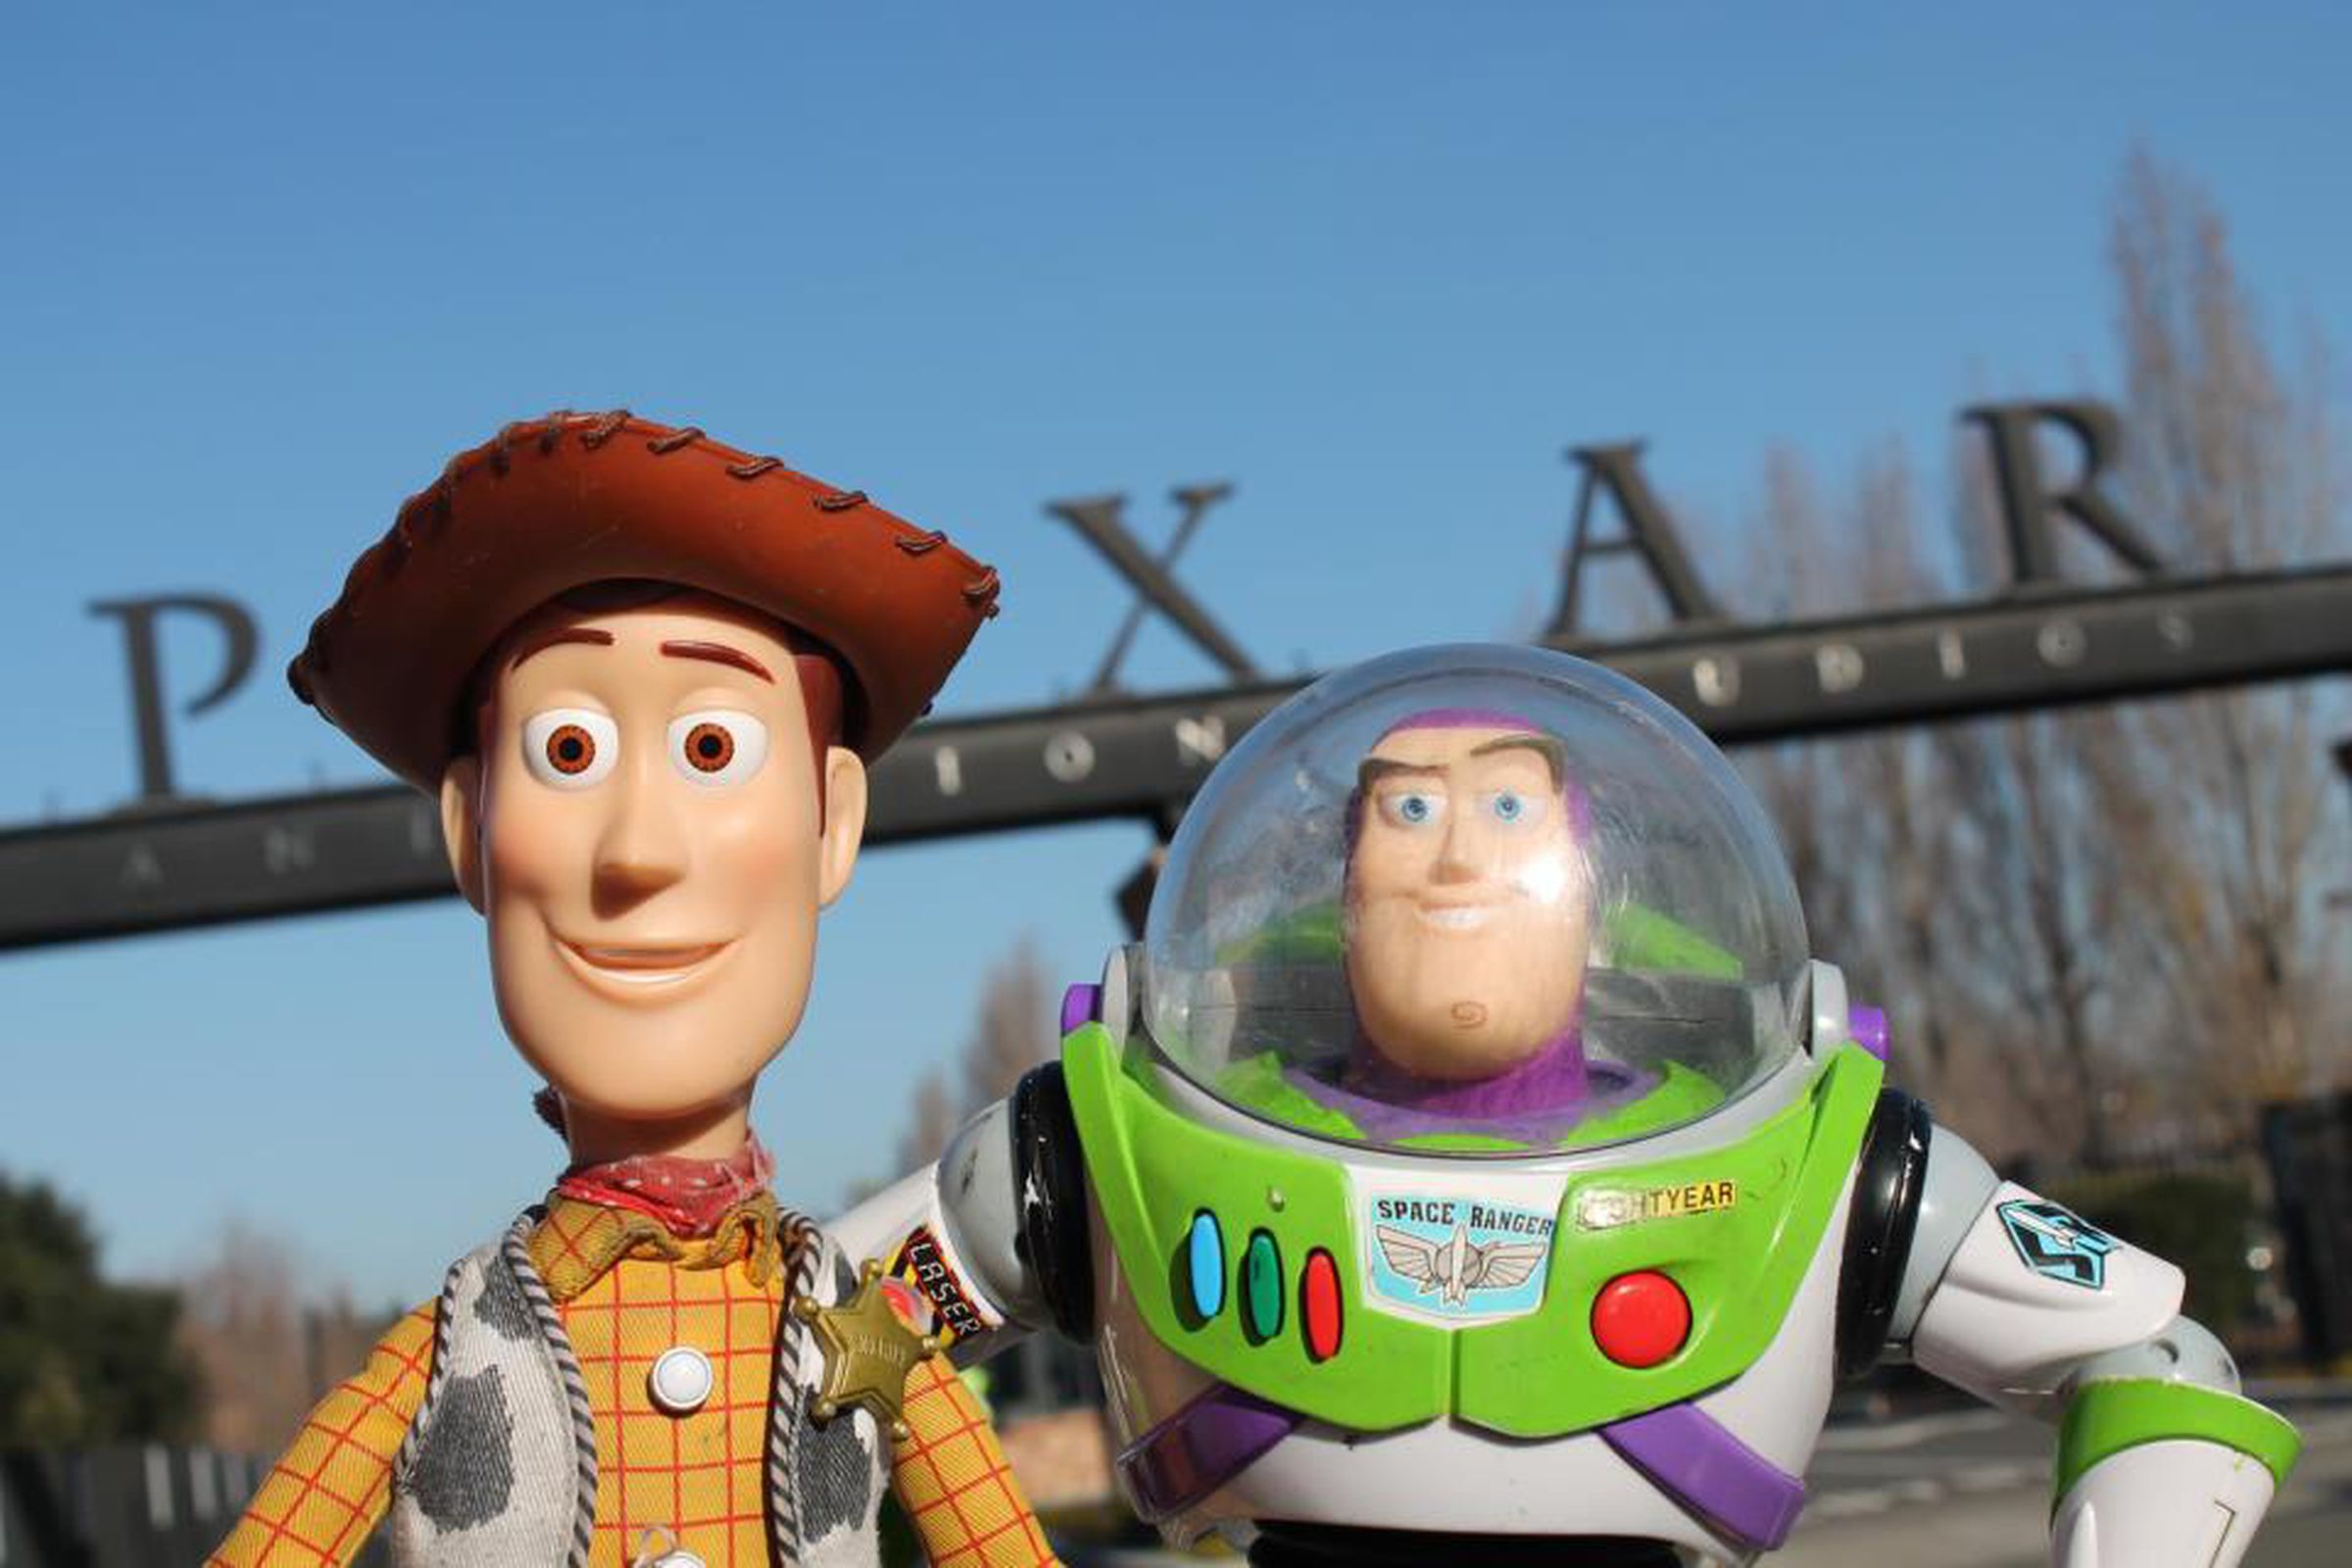 Toy Story live-action